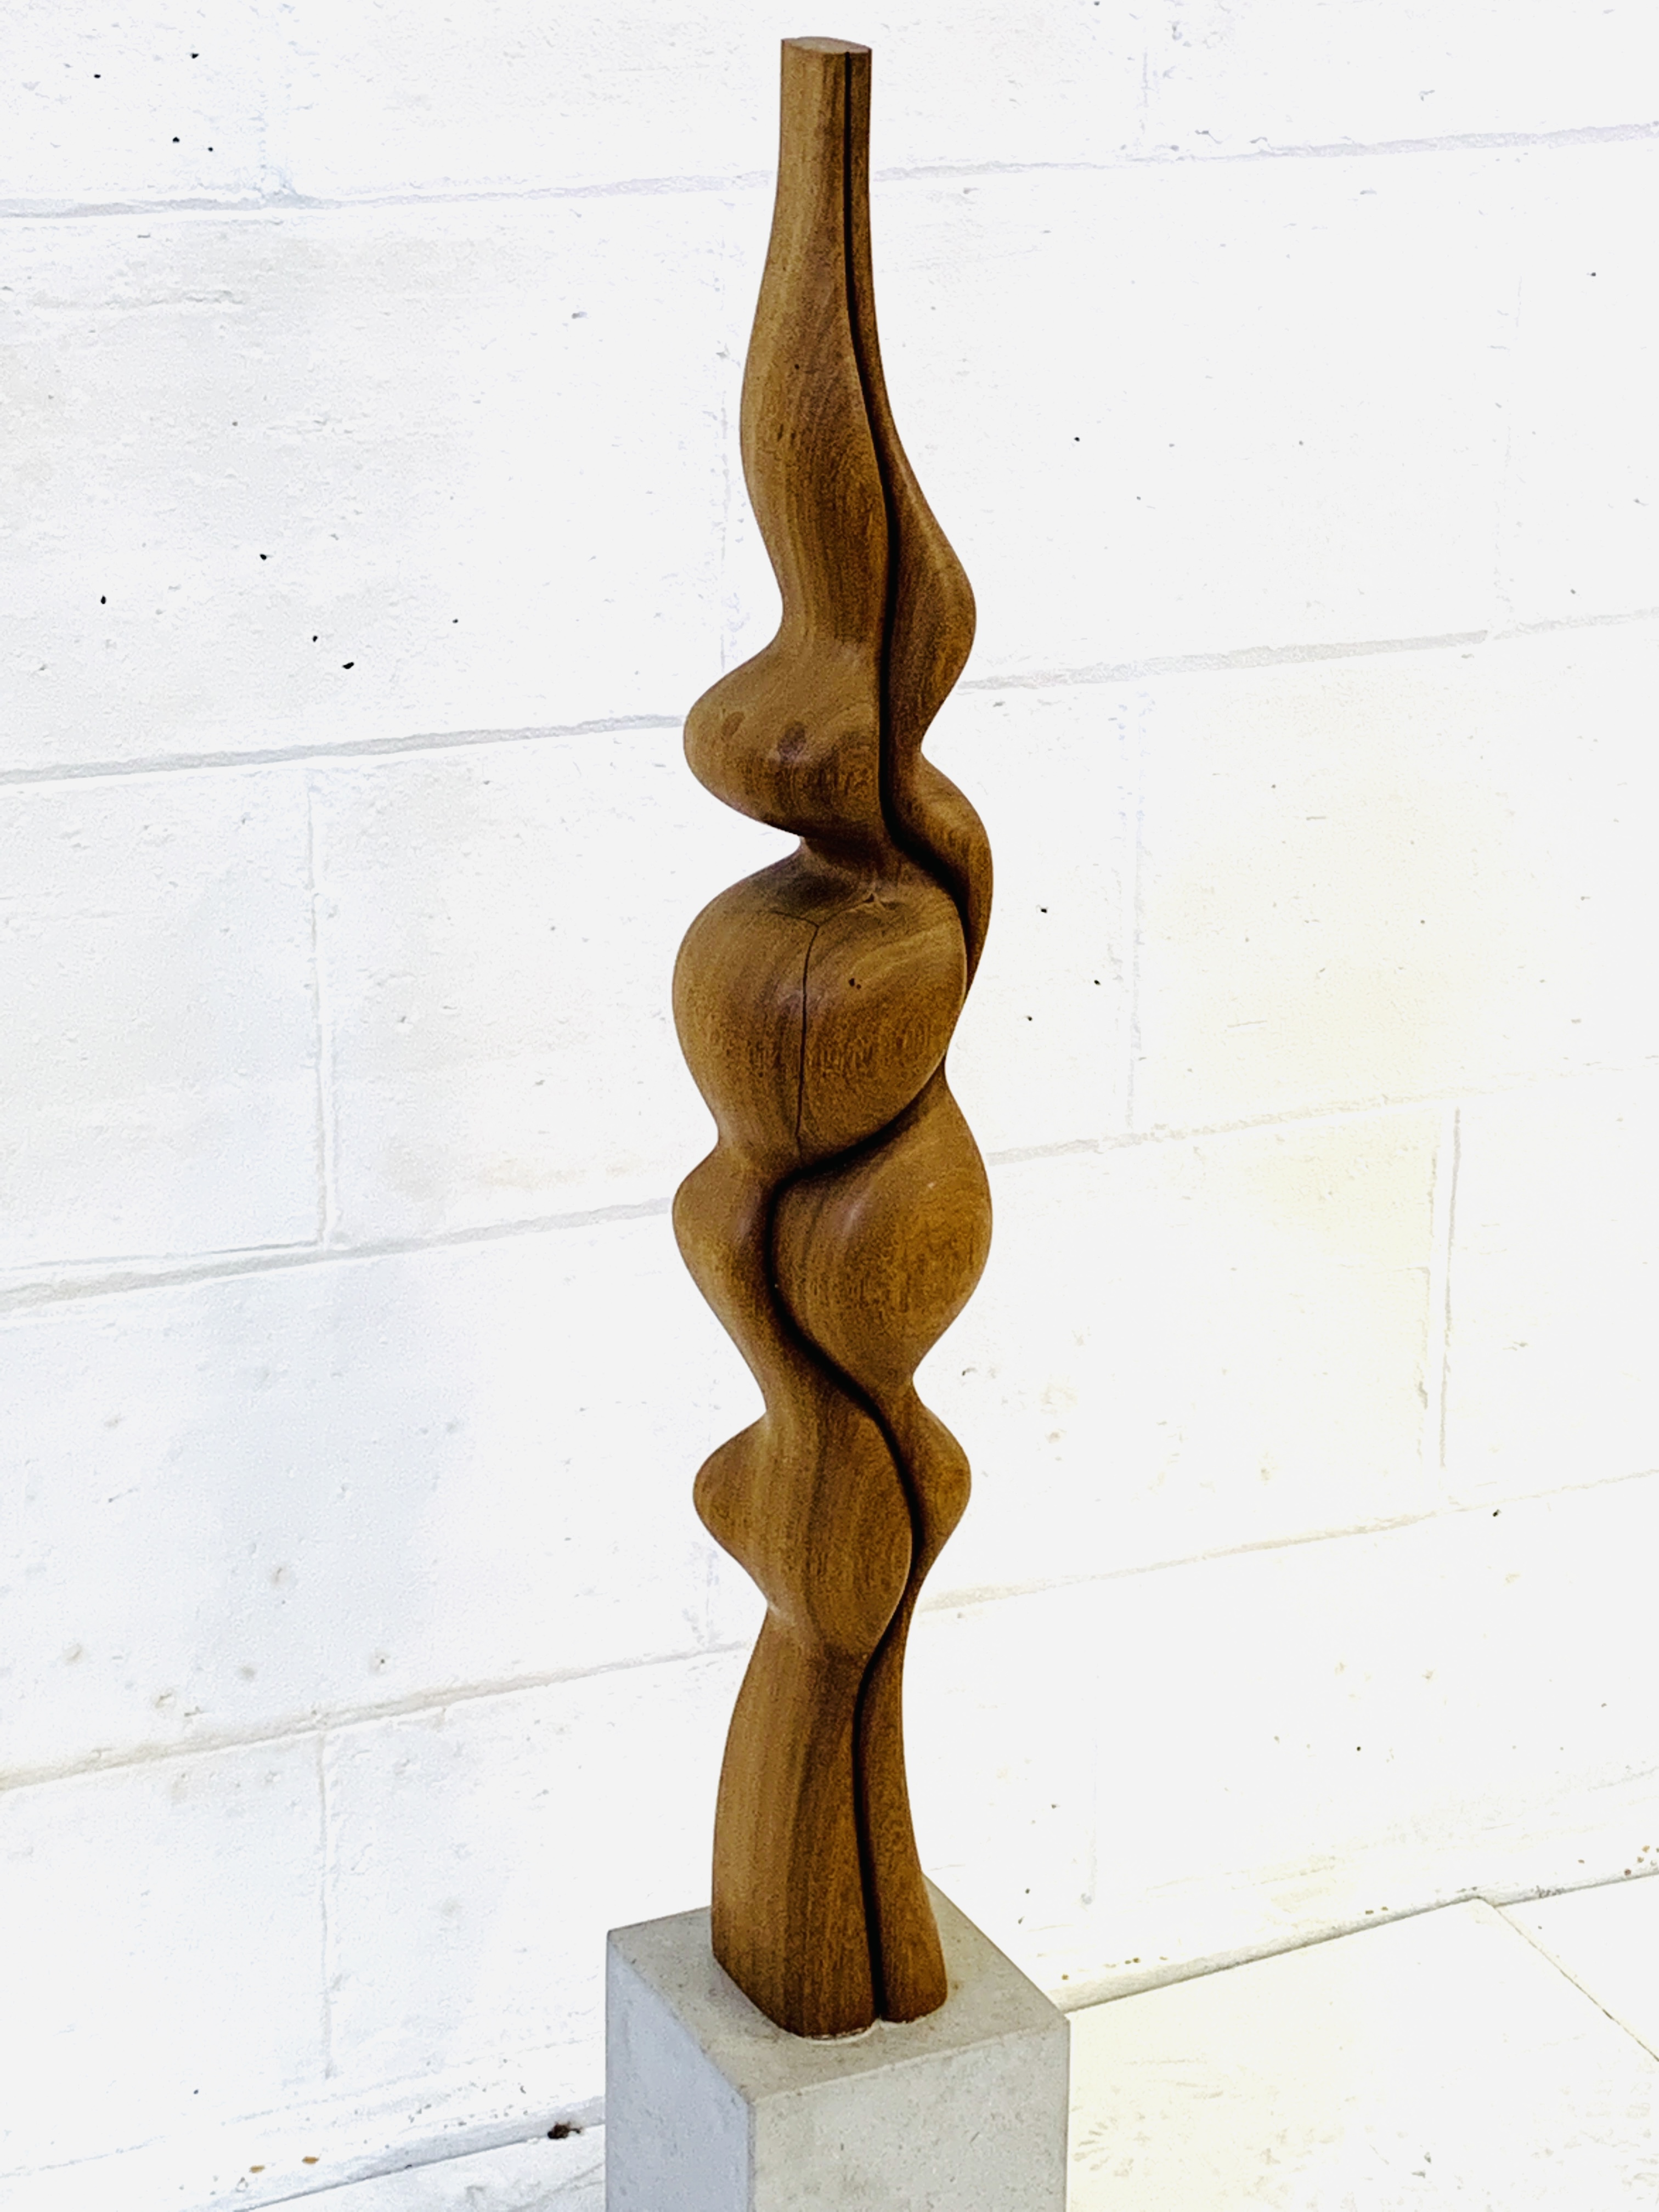 Abstract wood sculpture - Image 2 of 3